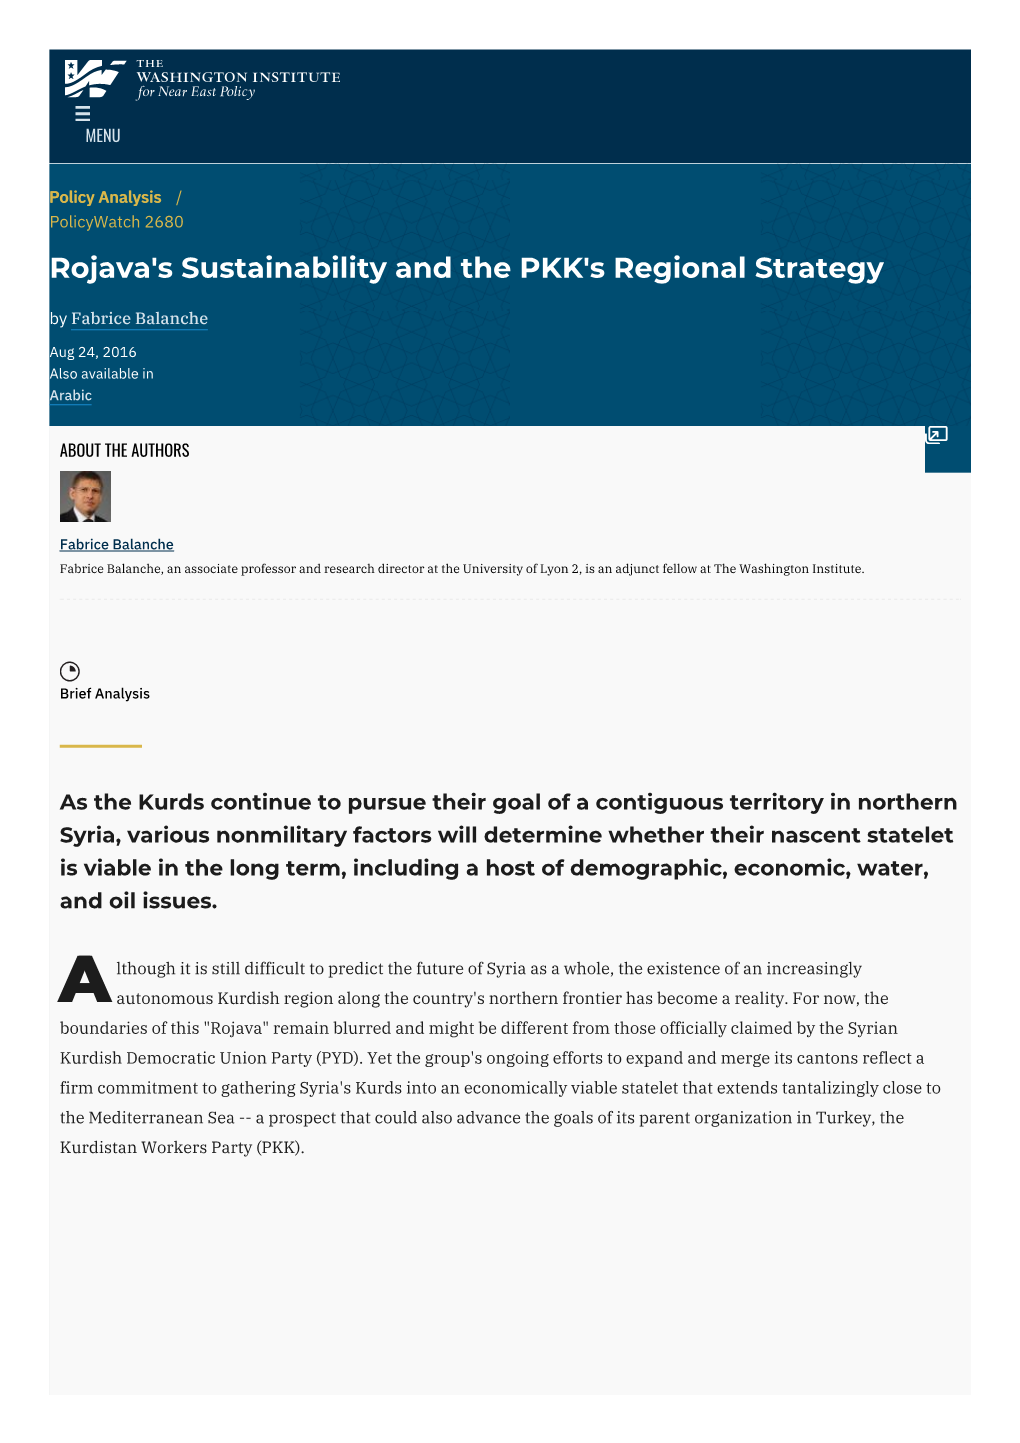 Rojava's Sustainability and the PKK's Regional Strategy by Fabrice Balanche